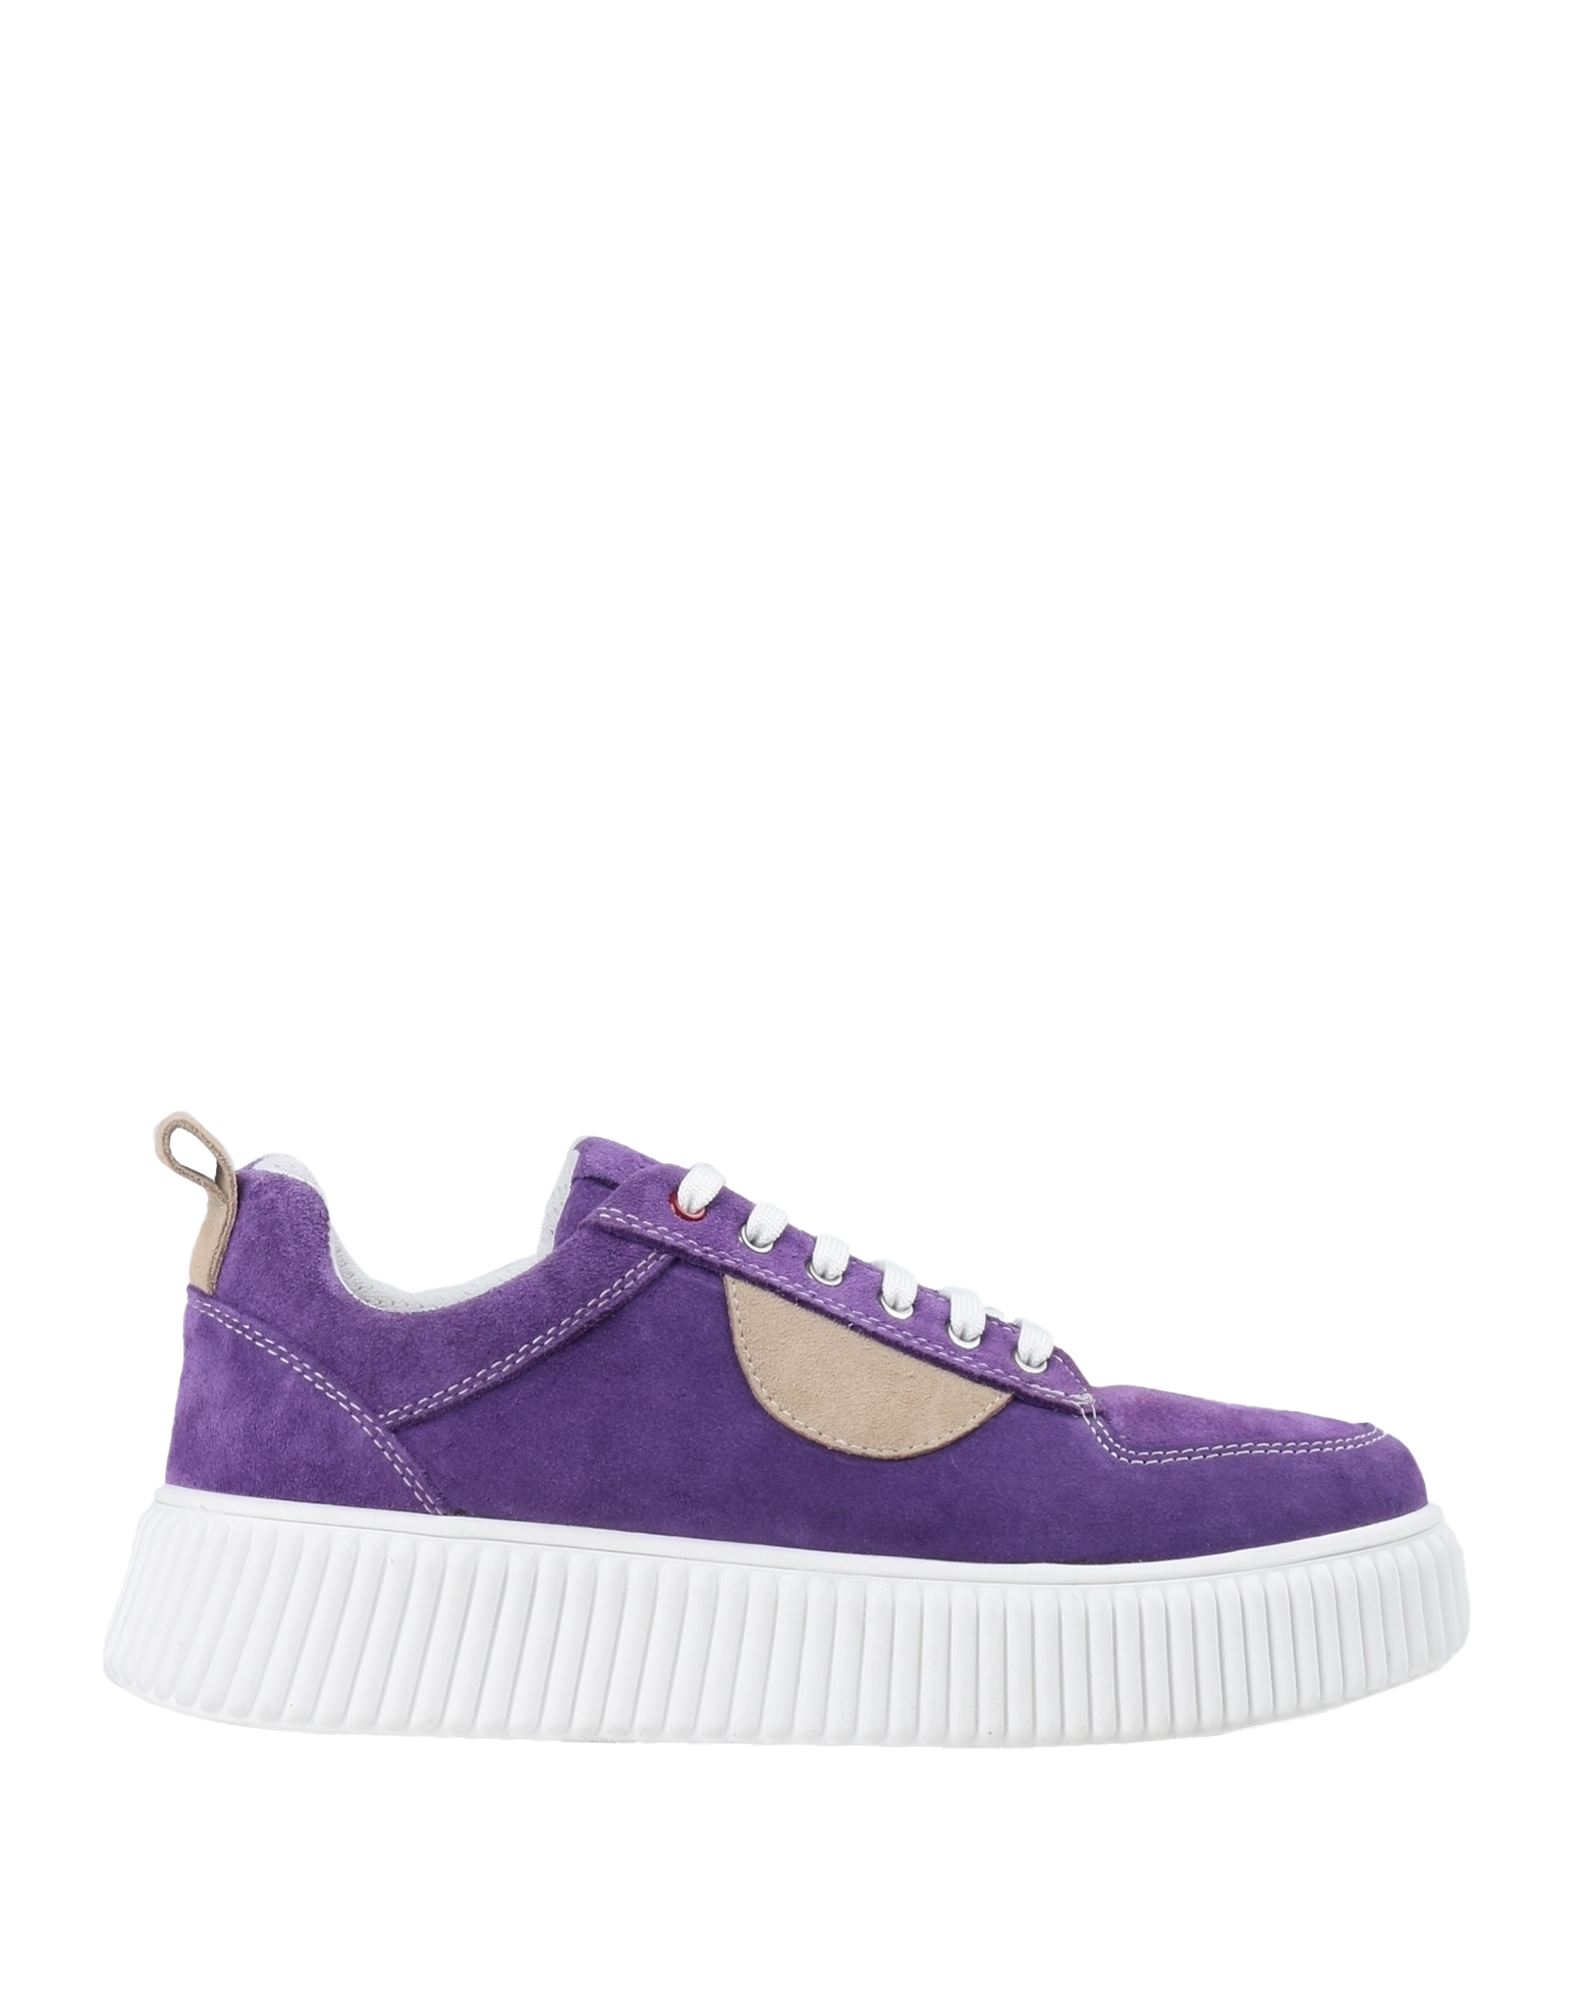 Max & Co . Woman Sneakers Purple Size 7 Soft Leather